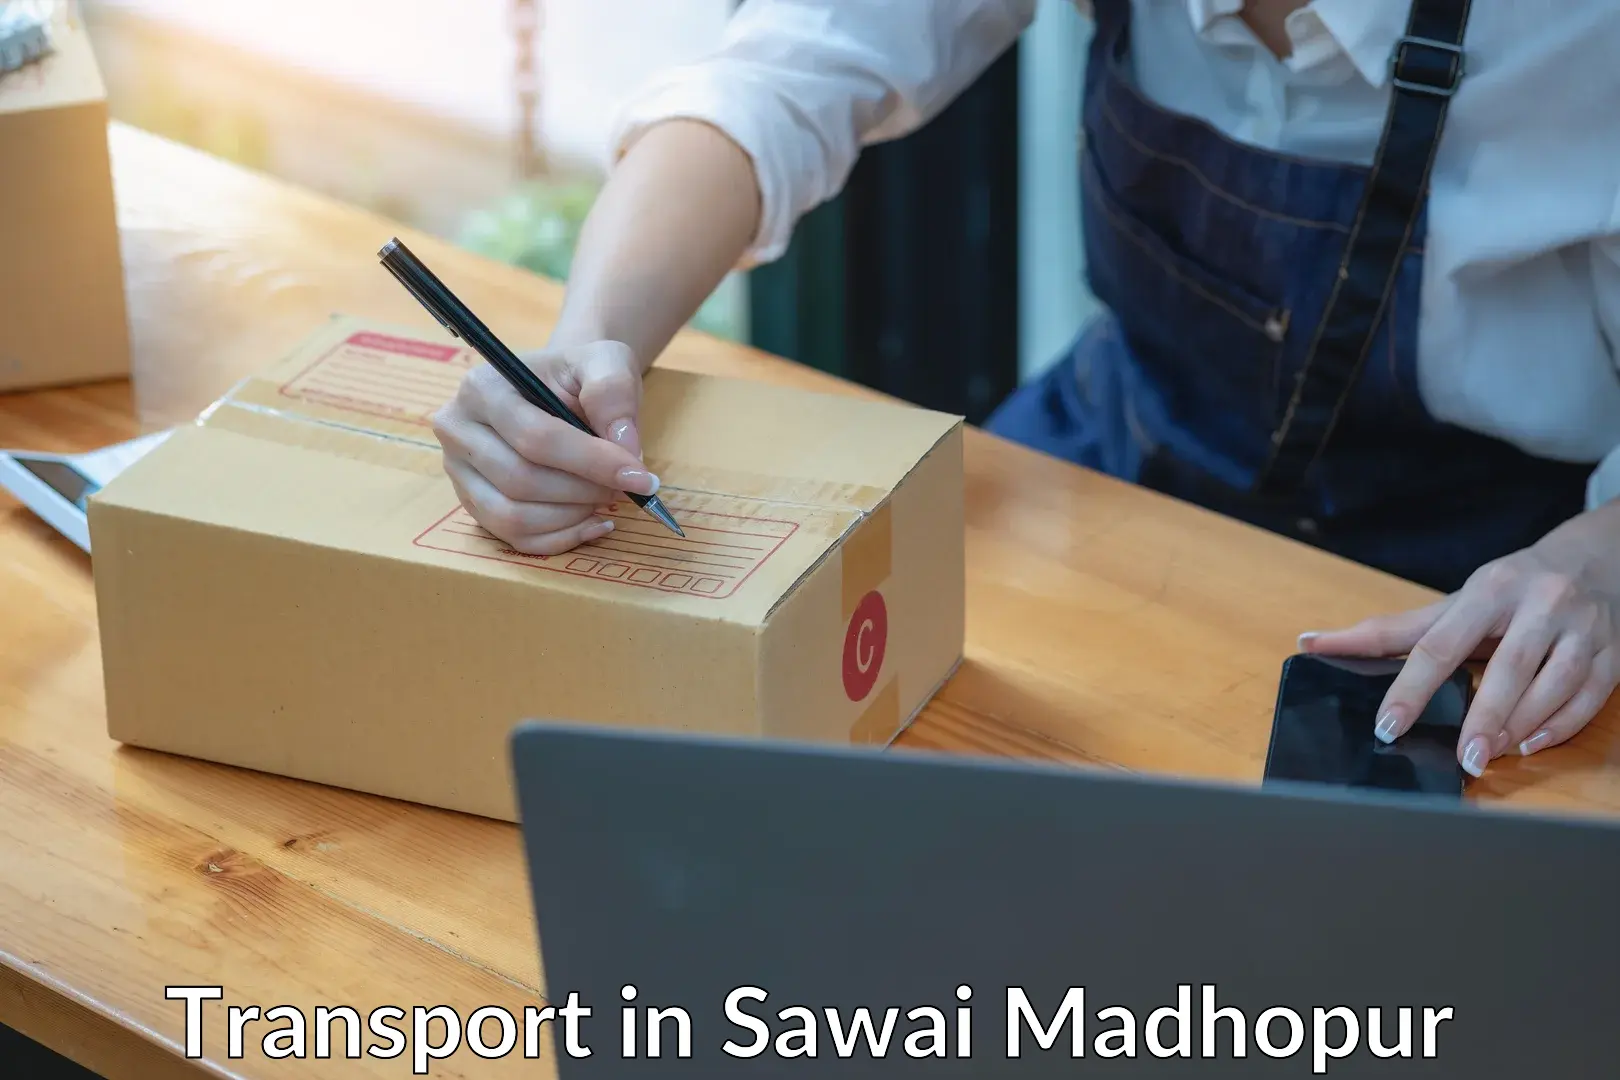 Transport services in Sawai Madhopur